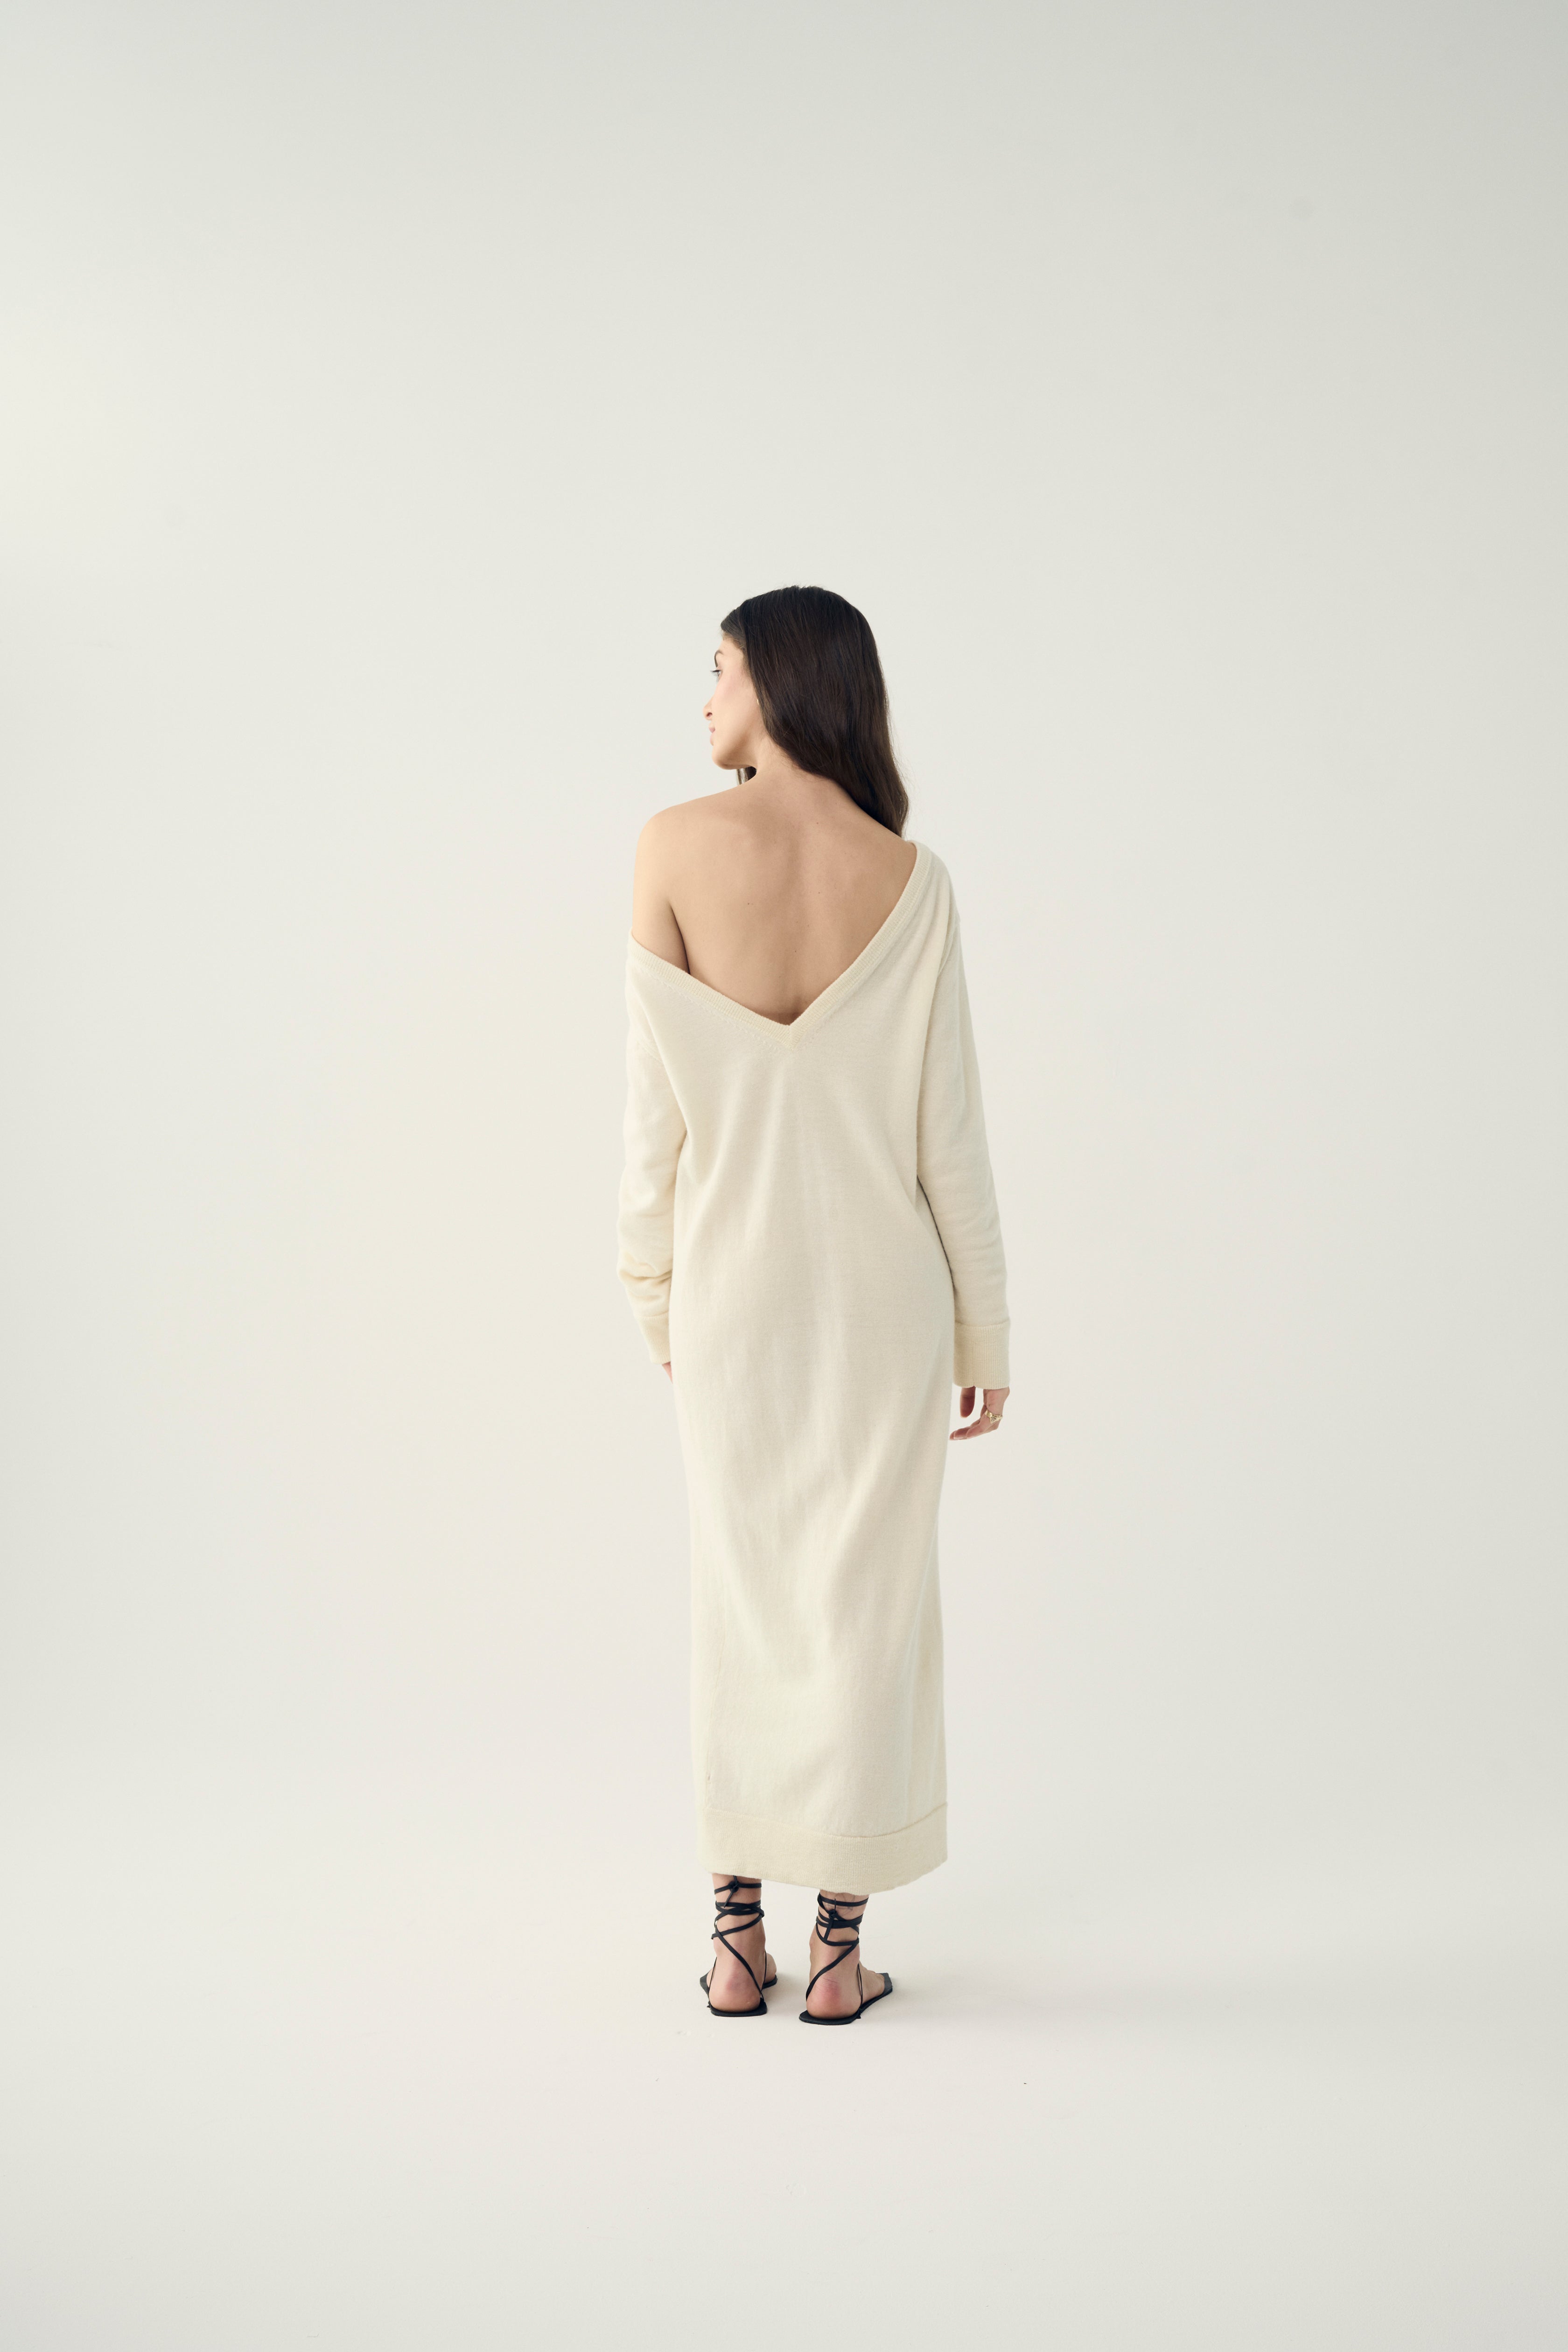 Reversible Climate Beneficial Merino Sweater Dress I